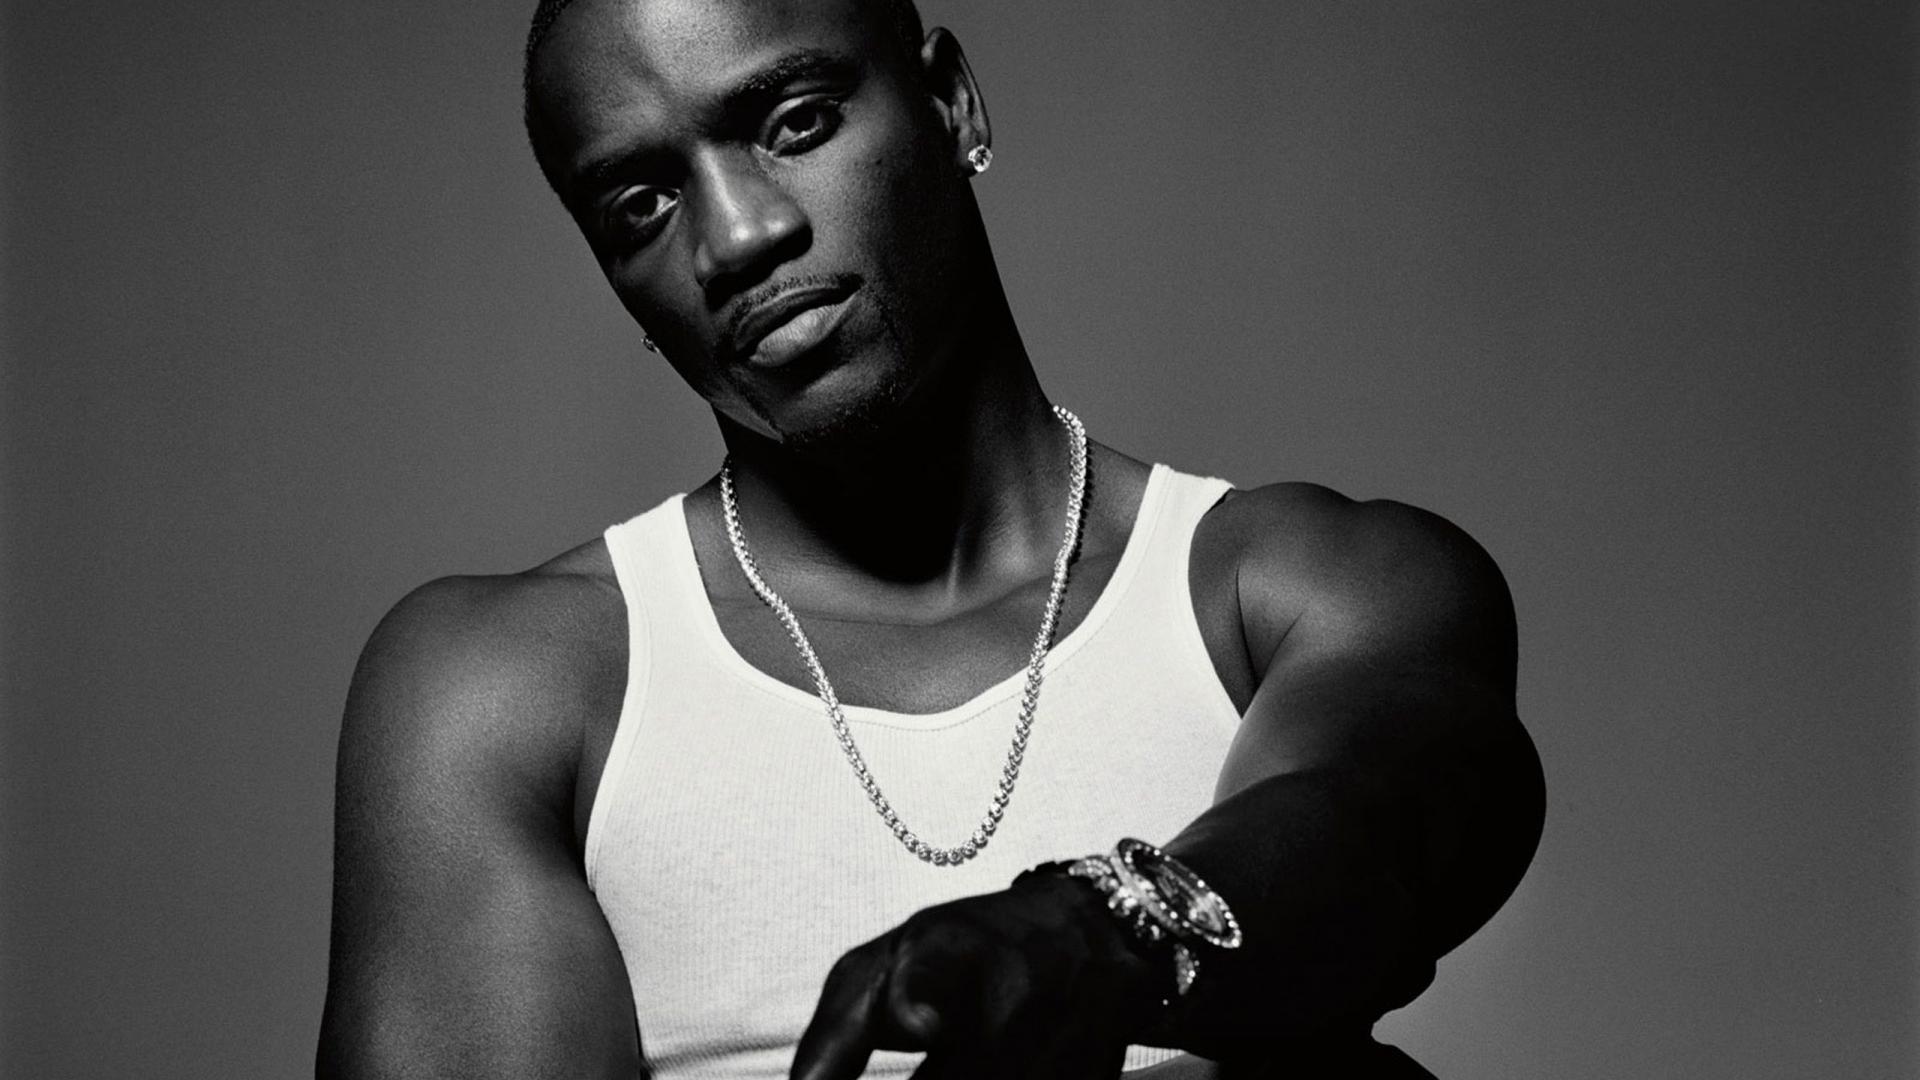 Akon is working on a new album project titled Stadium and it'll be interesting to hear if he's still got the consistent and catchy style we all used to love ...